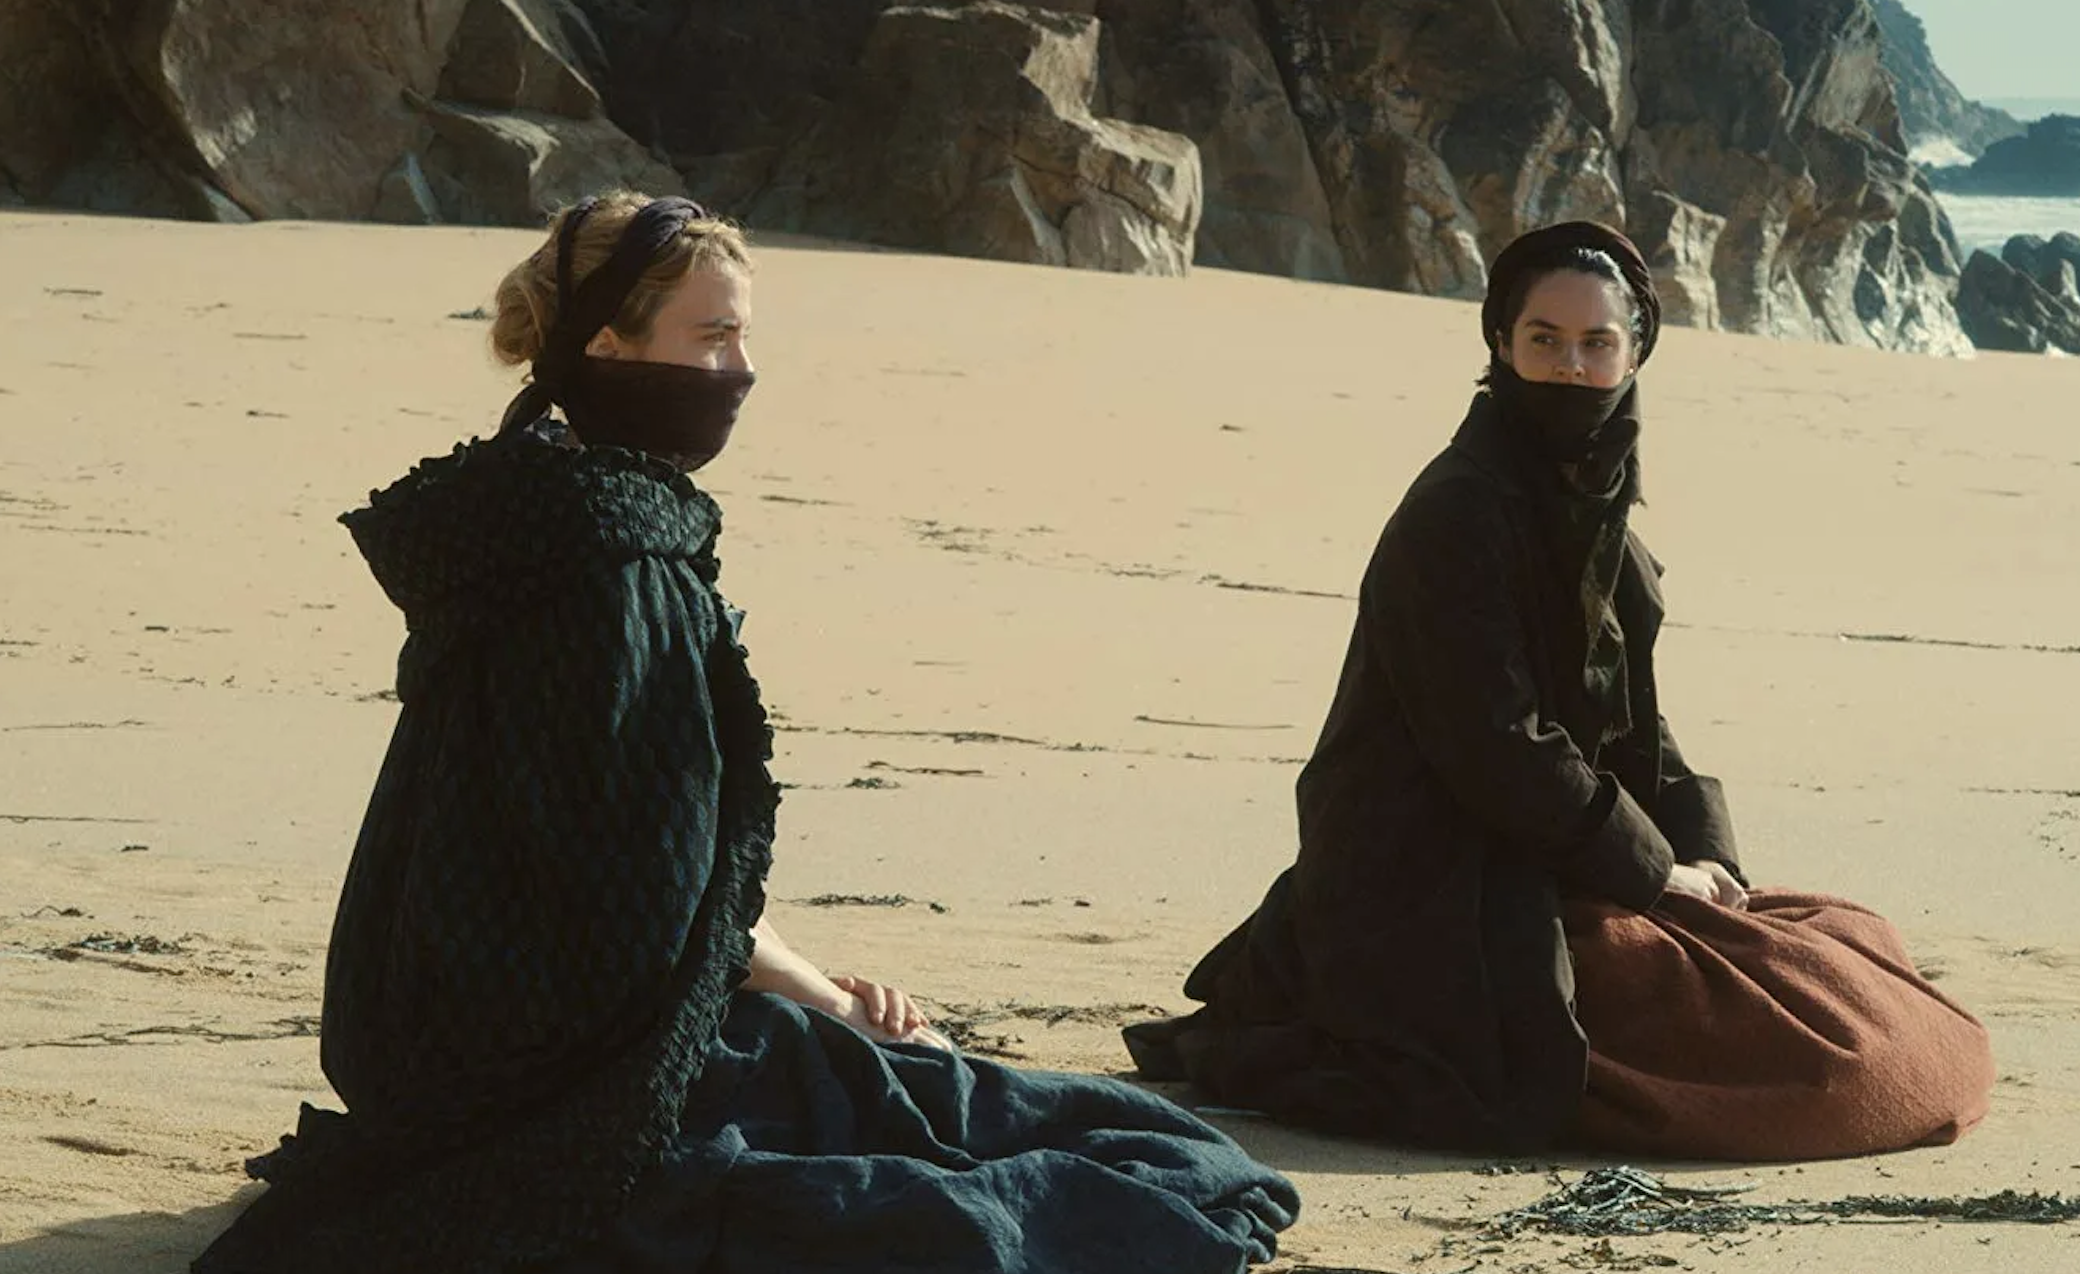 Two characters from the movie &#x27;Dune&#x27; sit on a sandy landscape, dressed in textured, dark garments